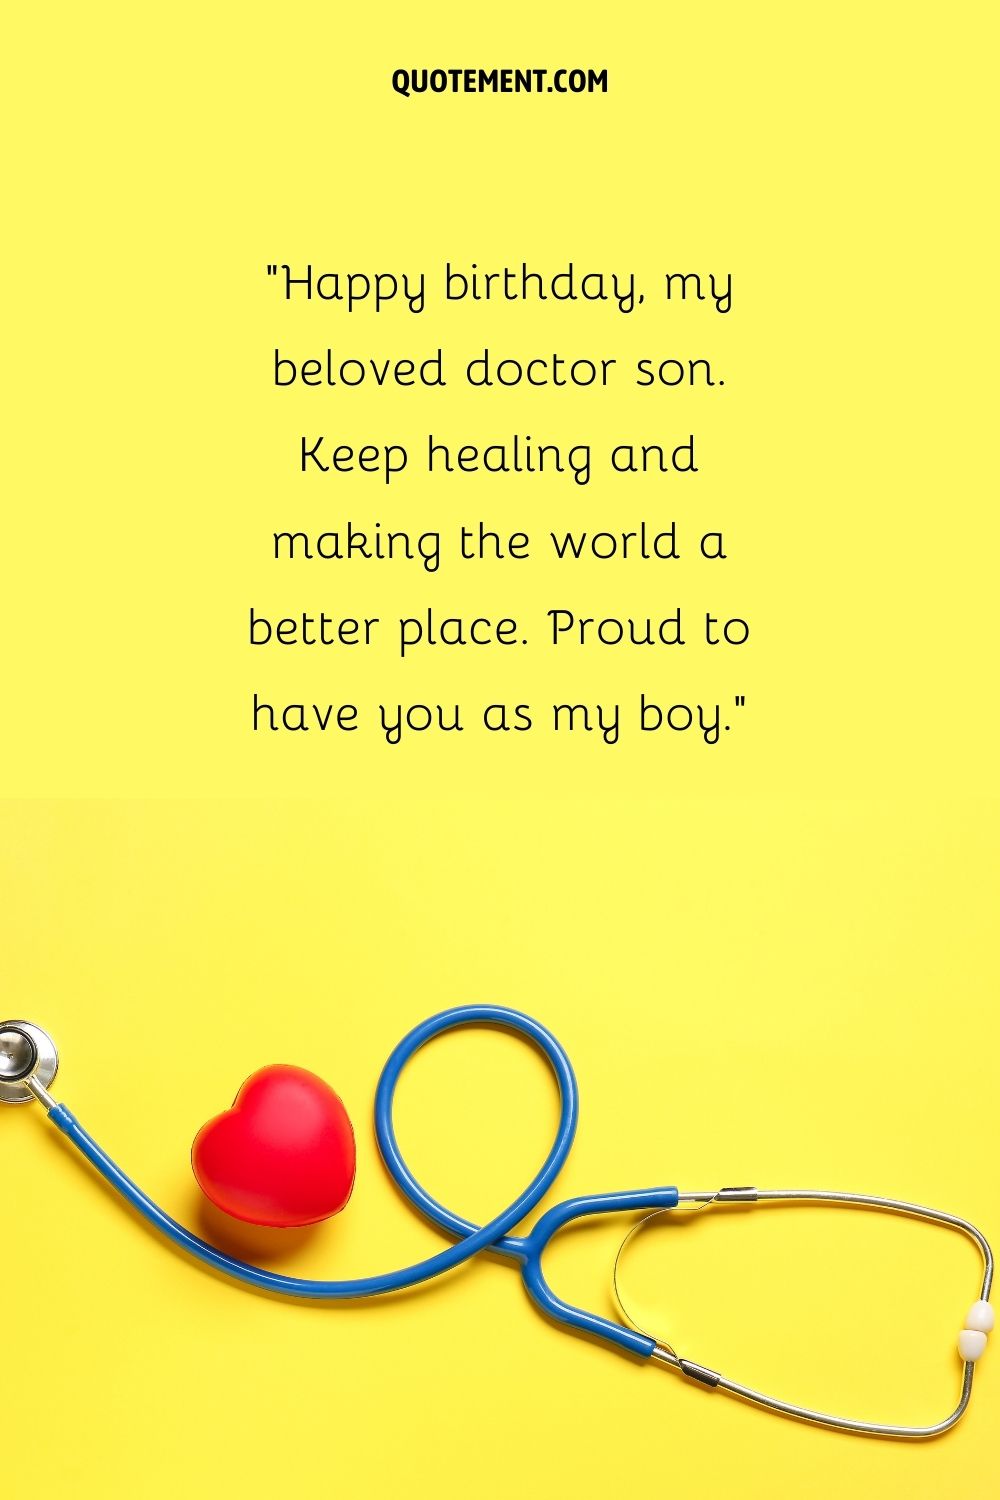 stethoscope on a yellow surface representing birthday doctor son